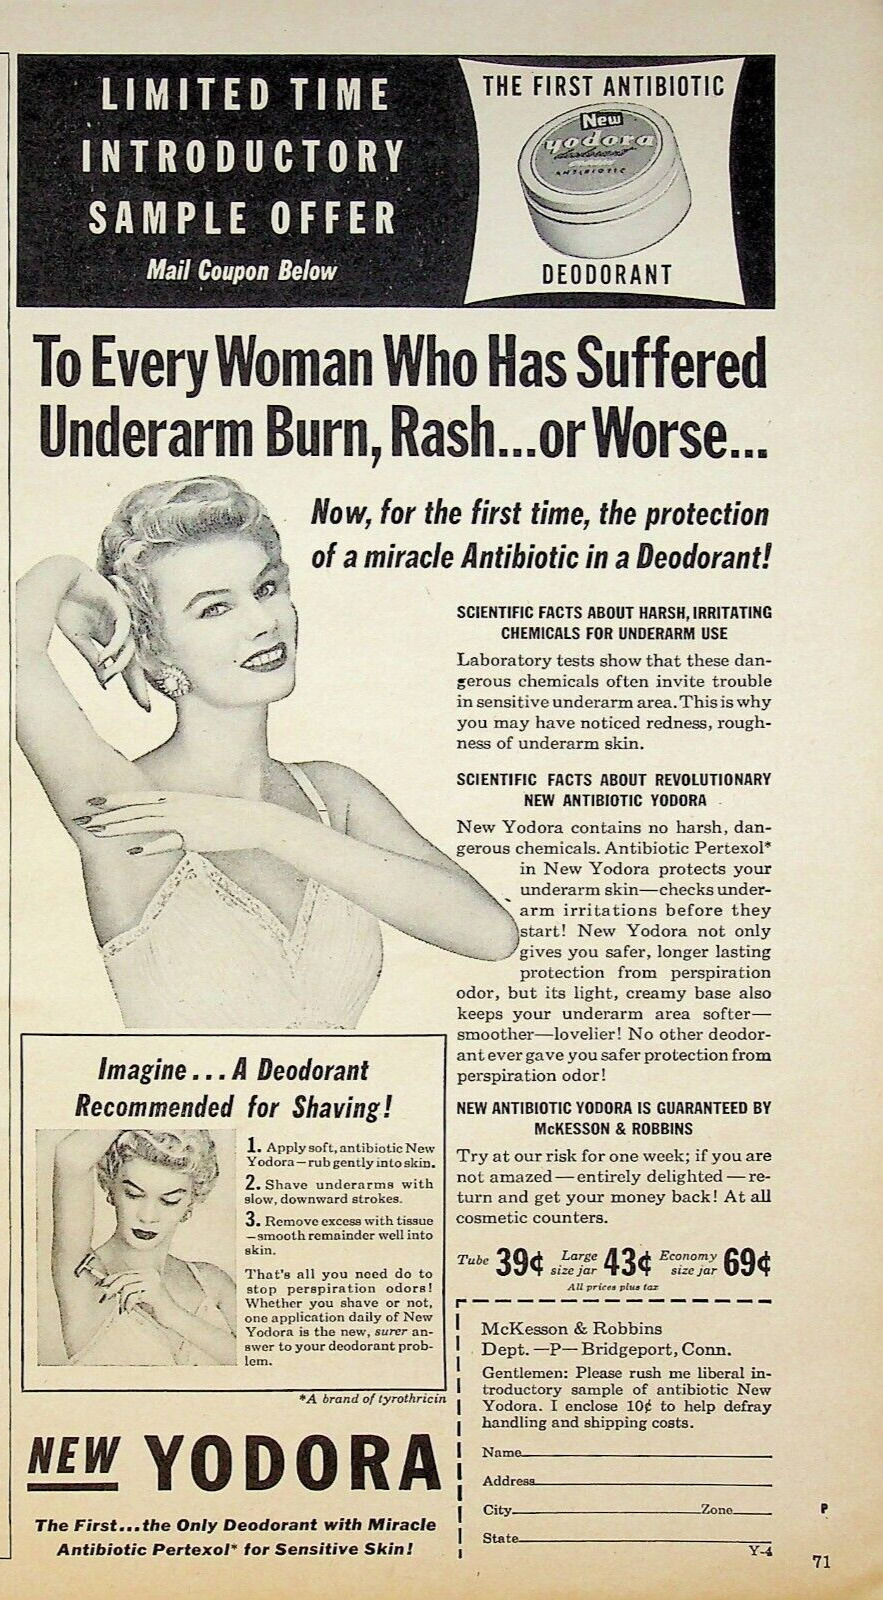 1955 Yodora First Antibiotic Deodorant Shaving Recommended 50s Vintage Print Ad